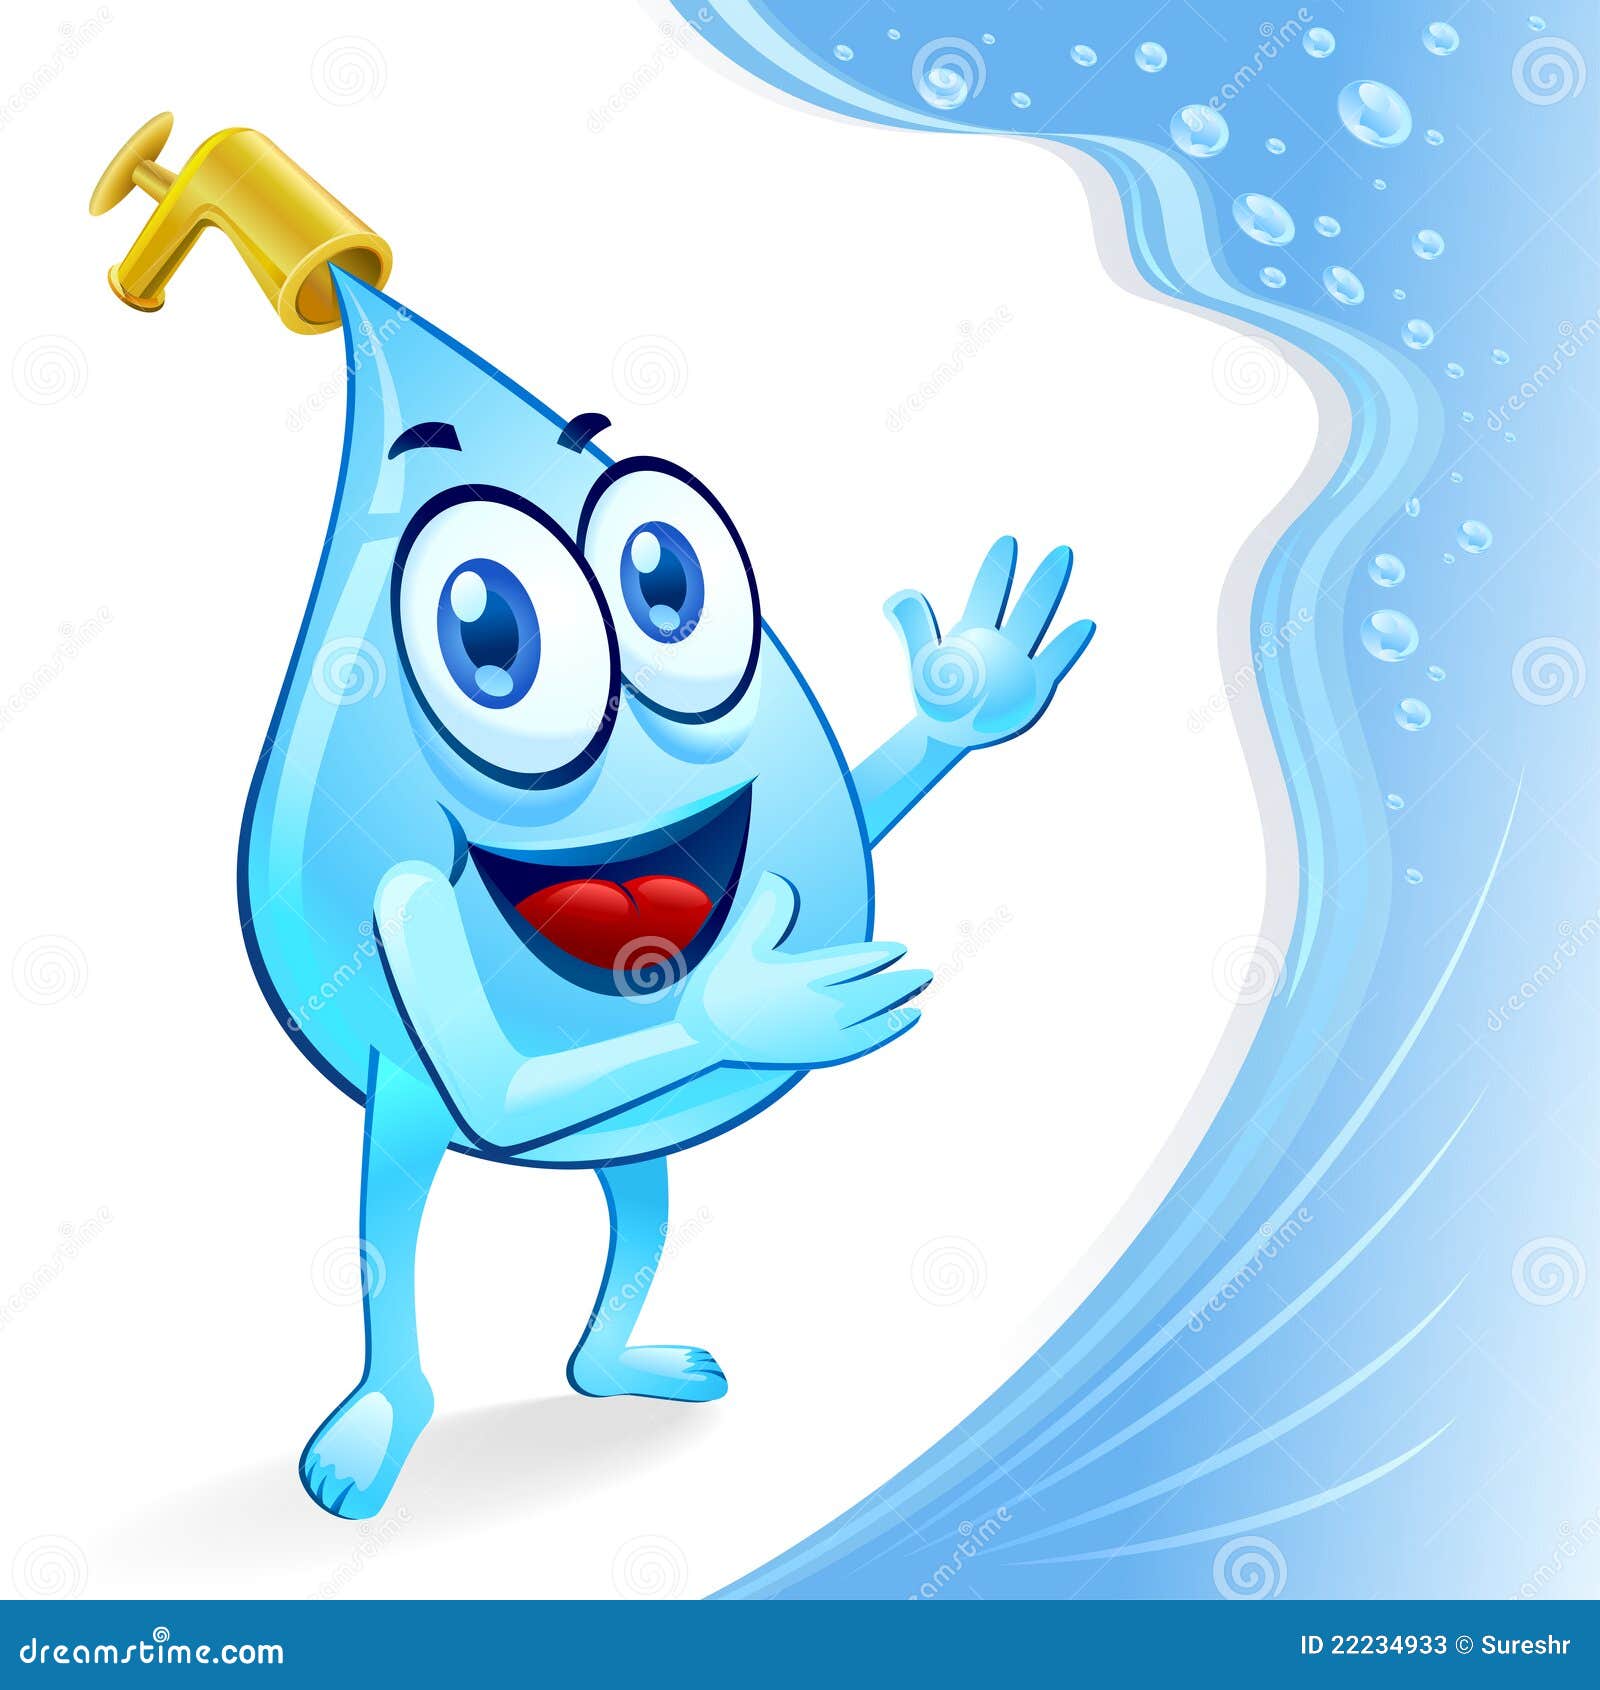 Mr Water Drop - Save me stock vector. Illustration of motion - 22234933